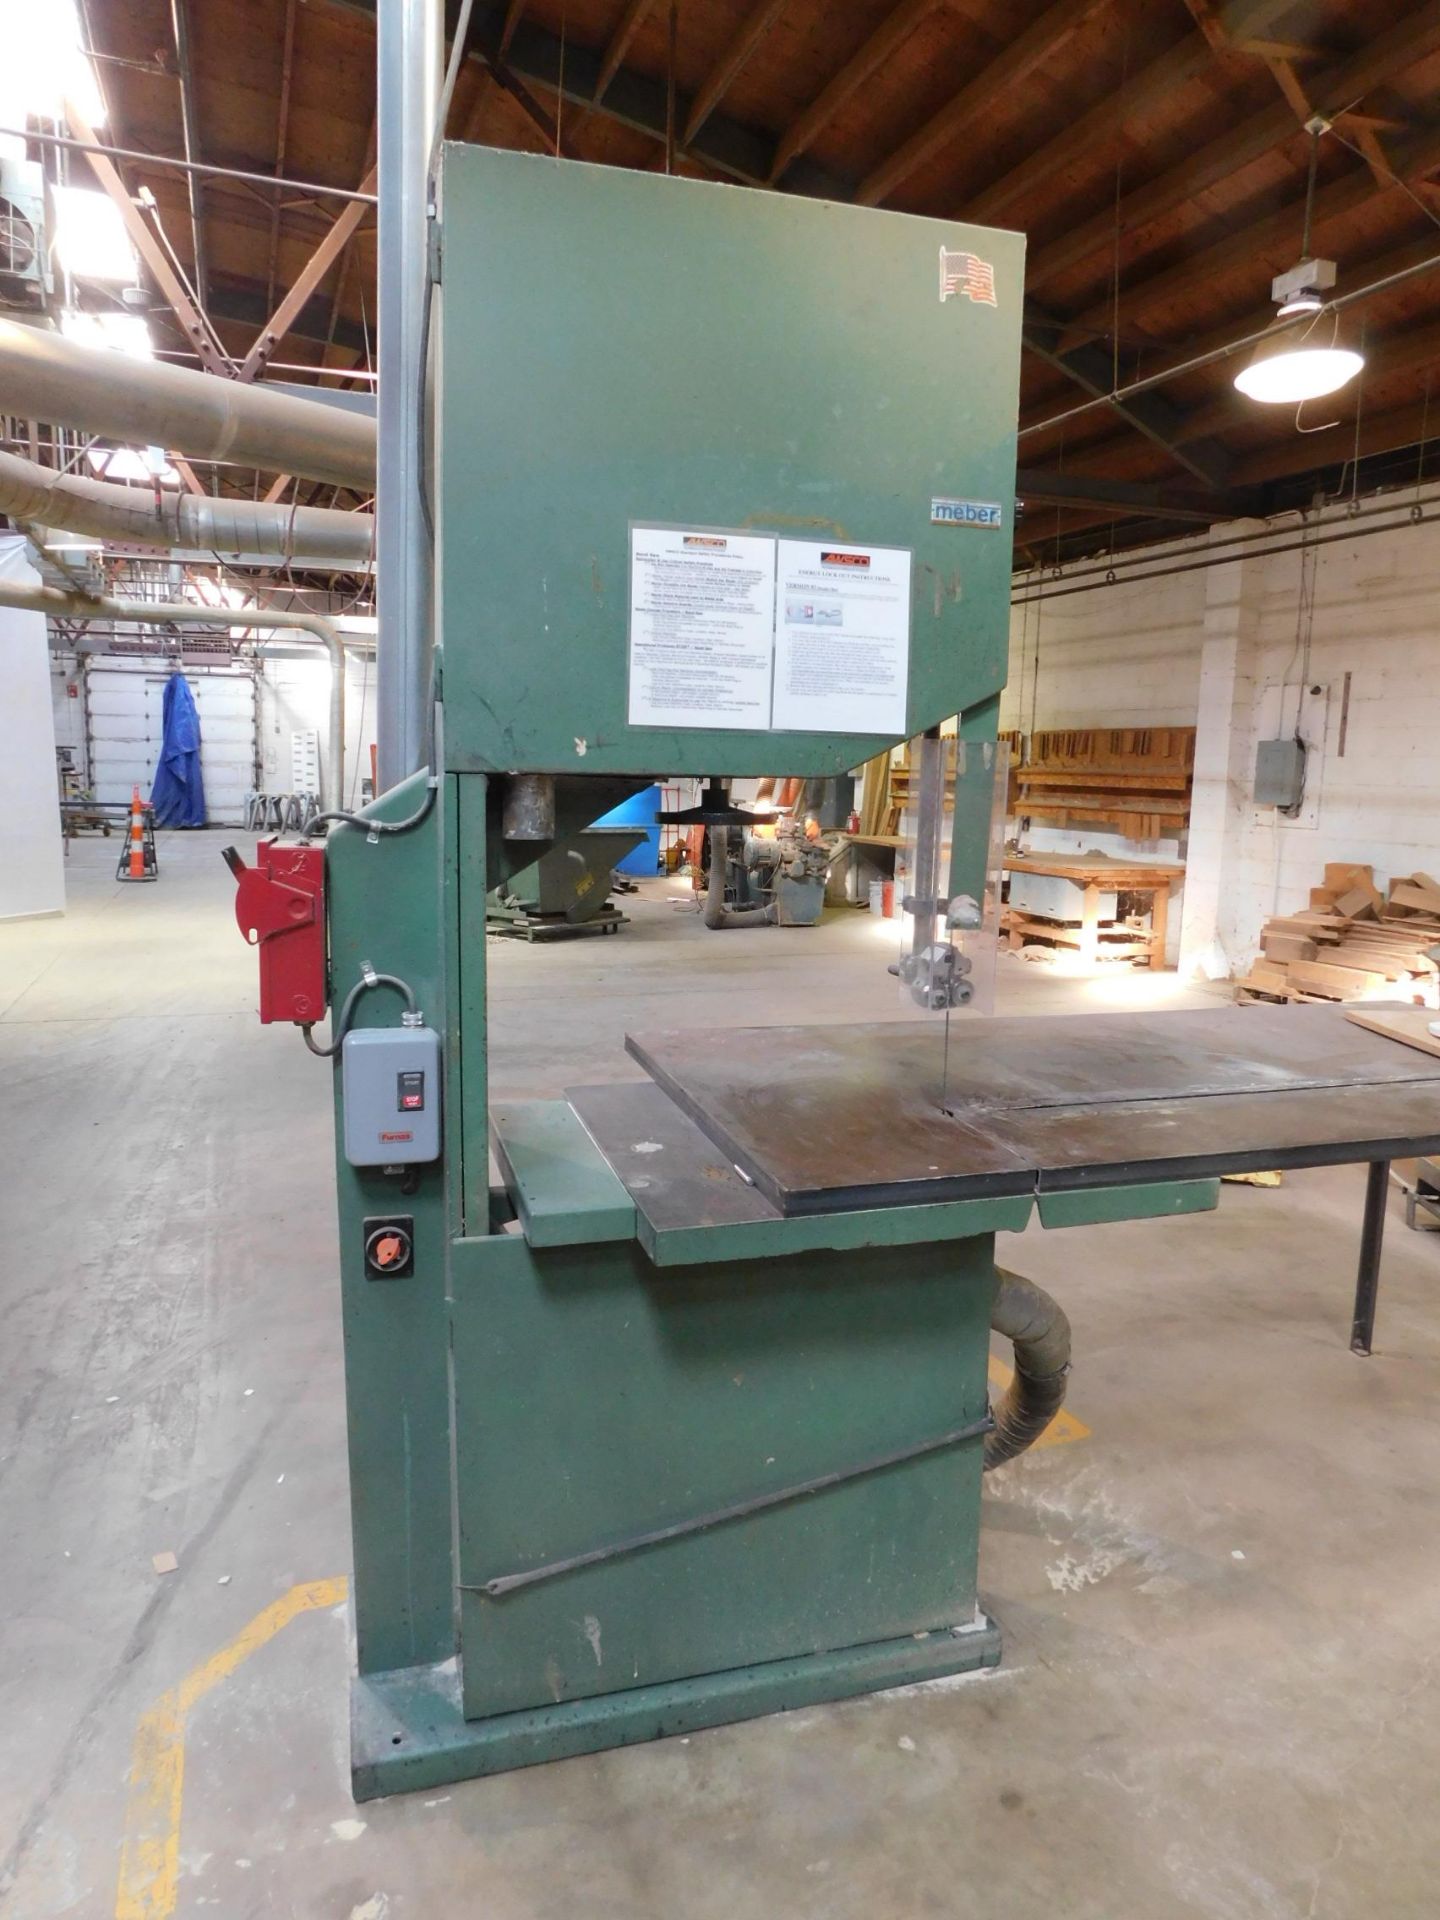 Meber Model 800, 32" Vertical Band Saw, s/n 3165, Infinite Radius Table from 2" - 72"